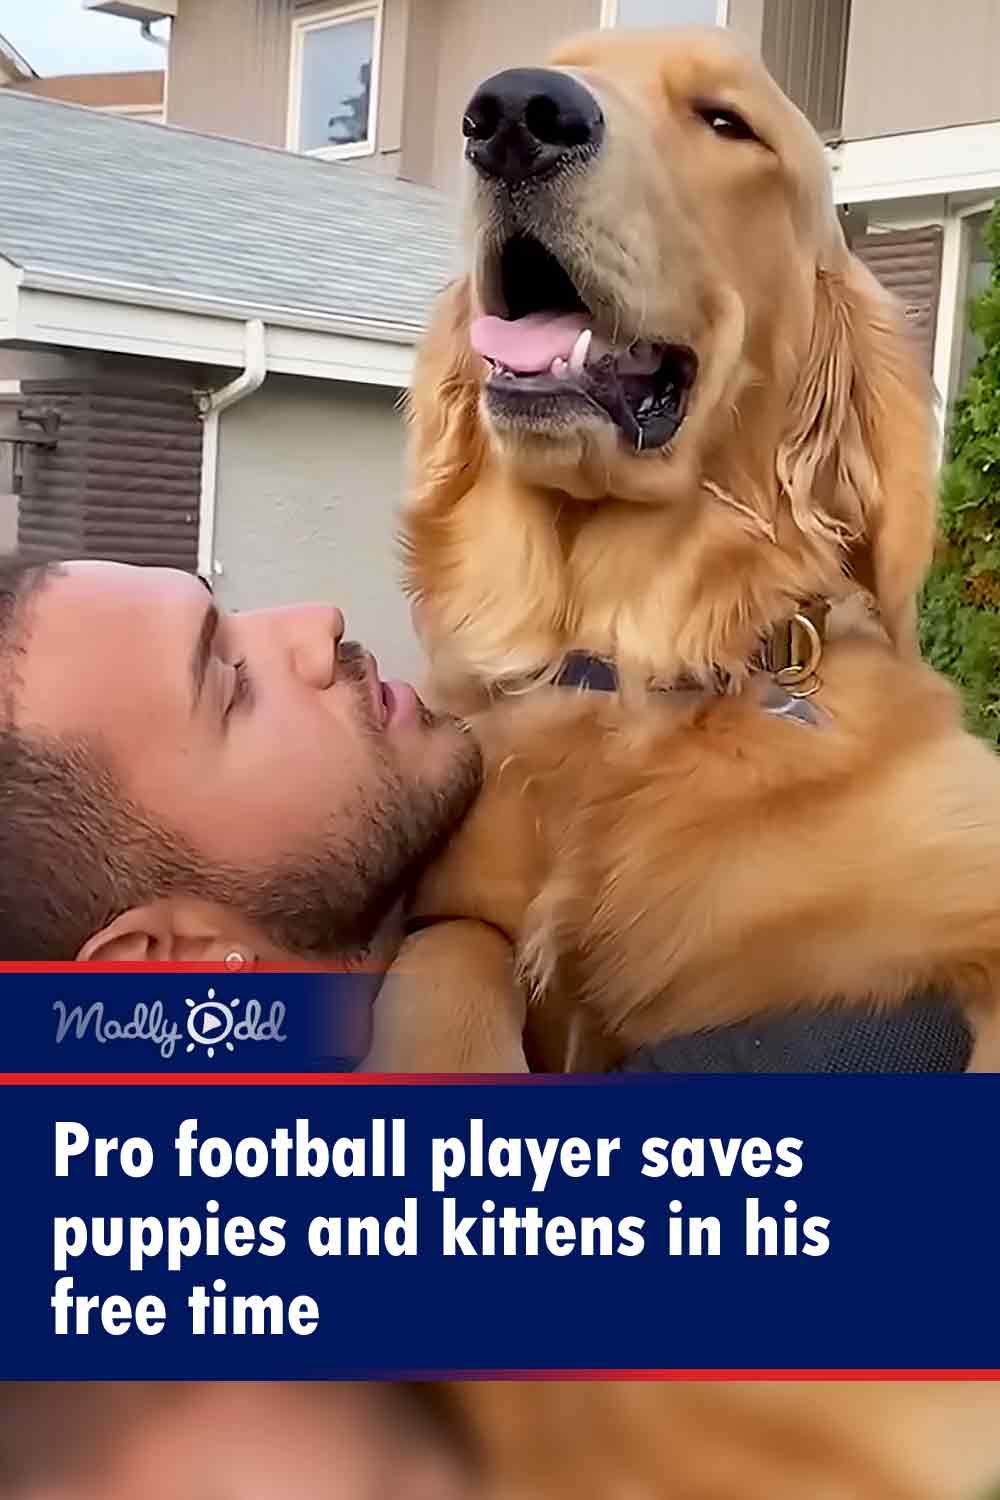 Pro football player saves puppies and kittens in his free time